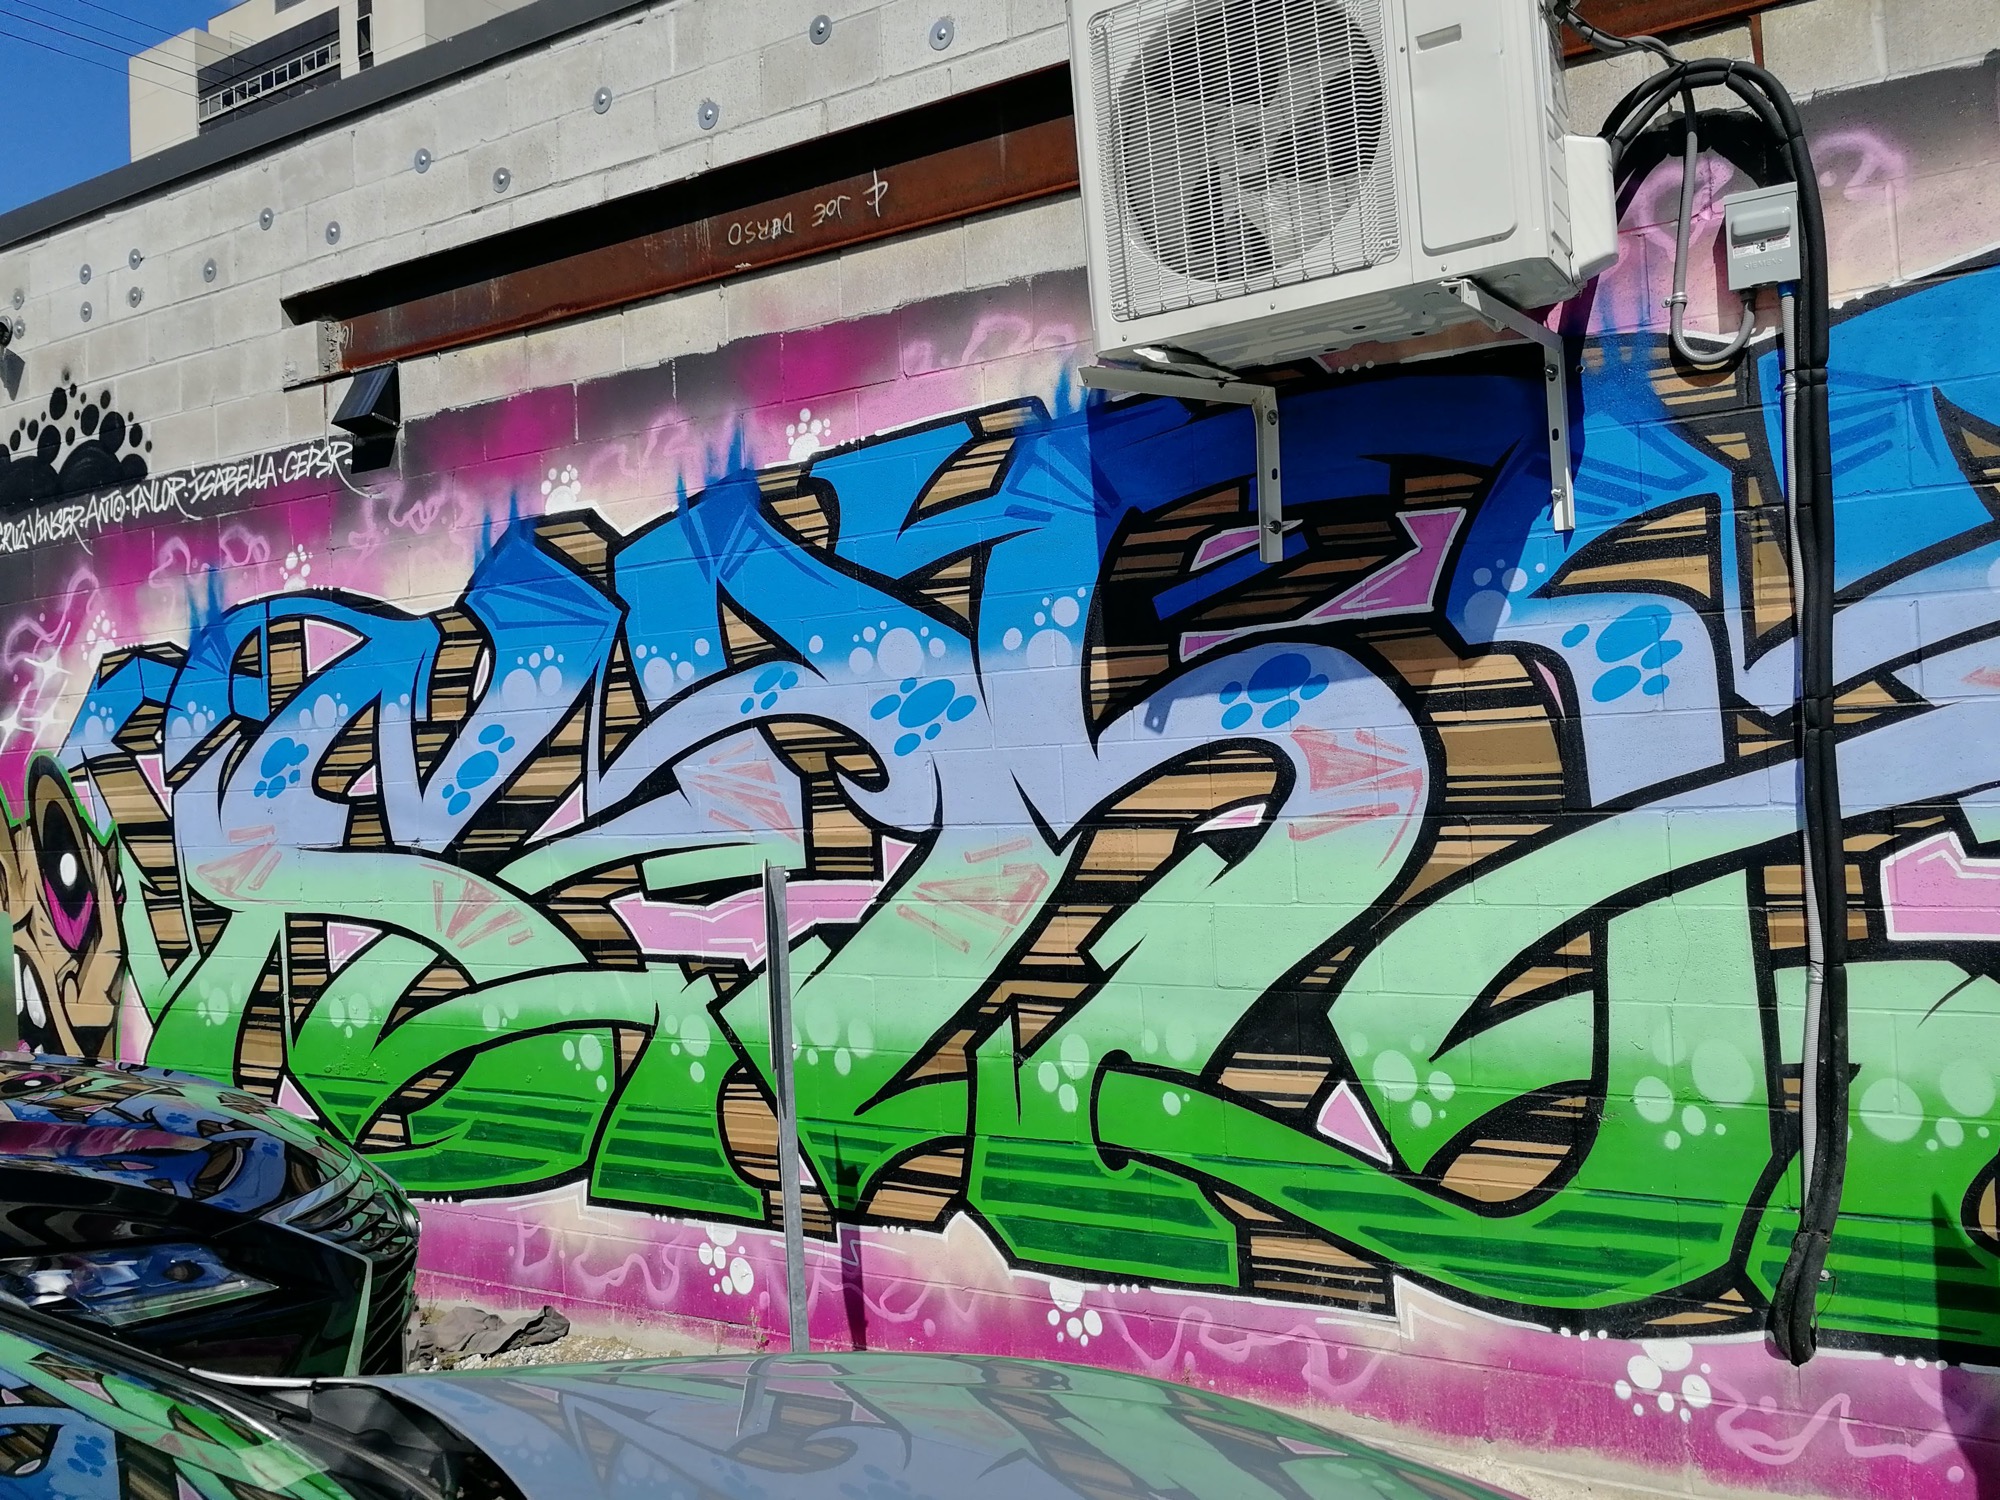 Graffiti 2337  captured by Rabot in Toronto Canada